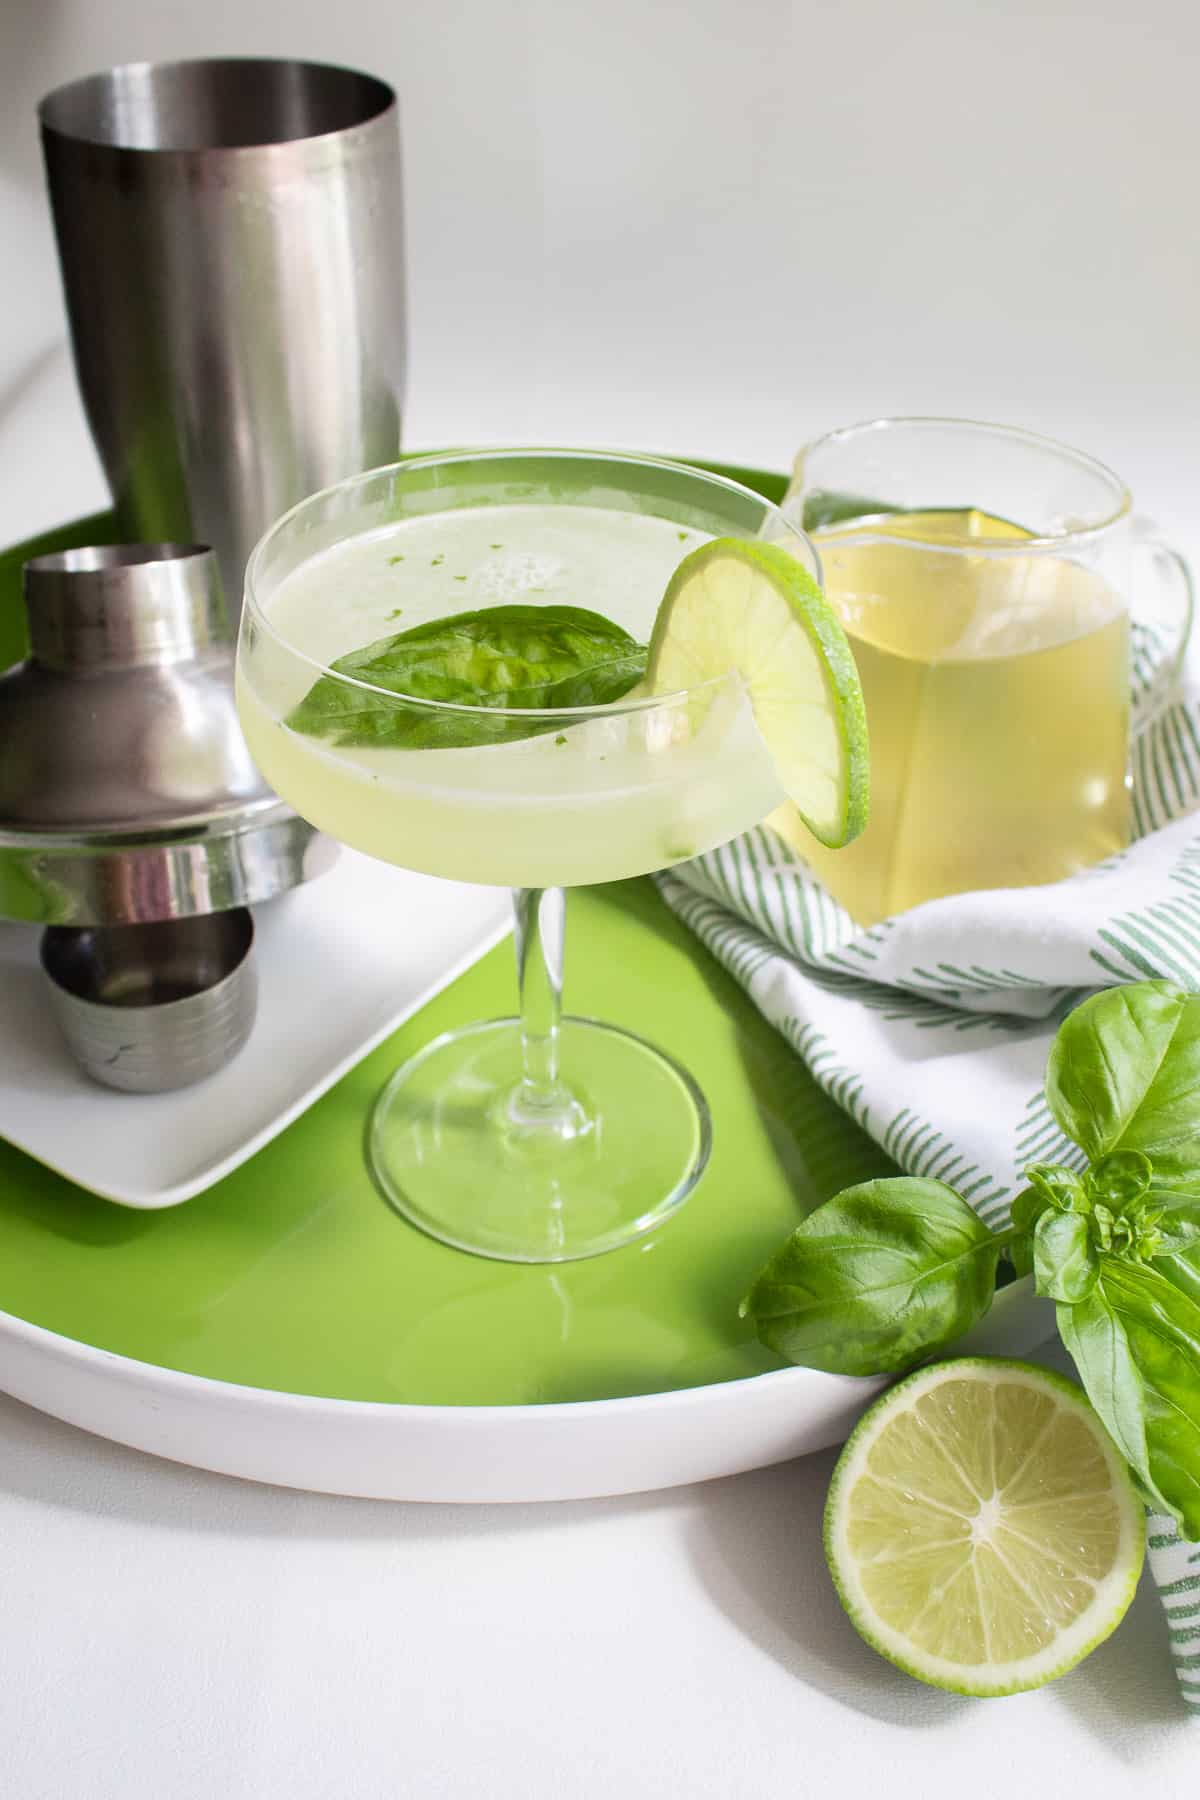 A pale green cocktail in a coupe glass sits on a green tray near a cocktail shaker, basil leaves, lime slices, and a pitcher of a pale yellow syrup.